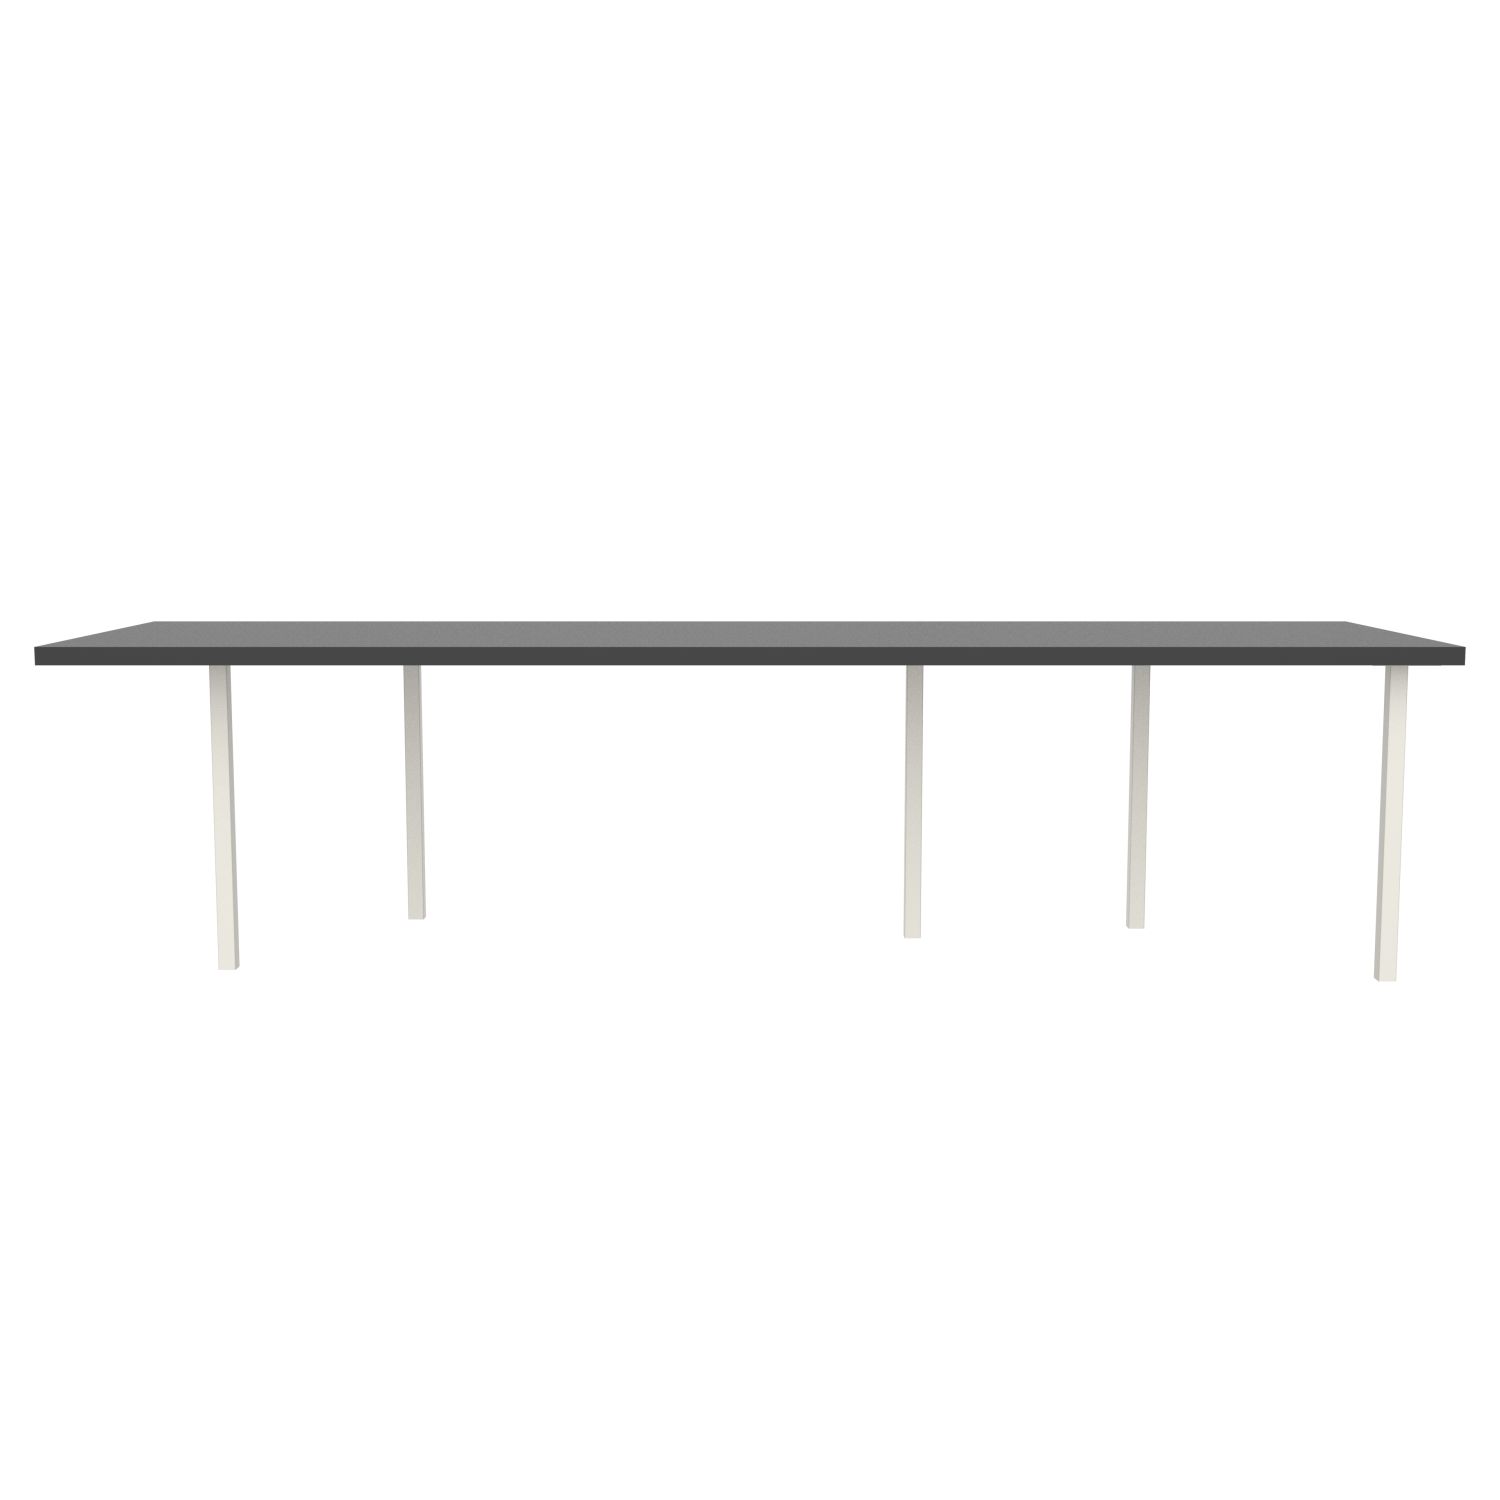 lensvelt bbrand table five fixed heigt 915x310 hpl black 50 mm price level 1 white ral9010